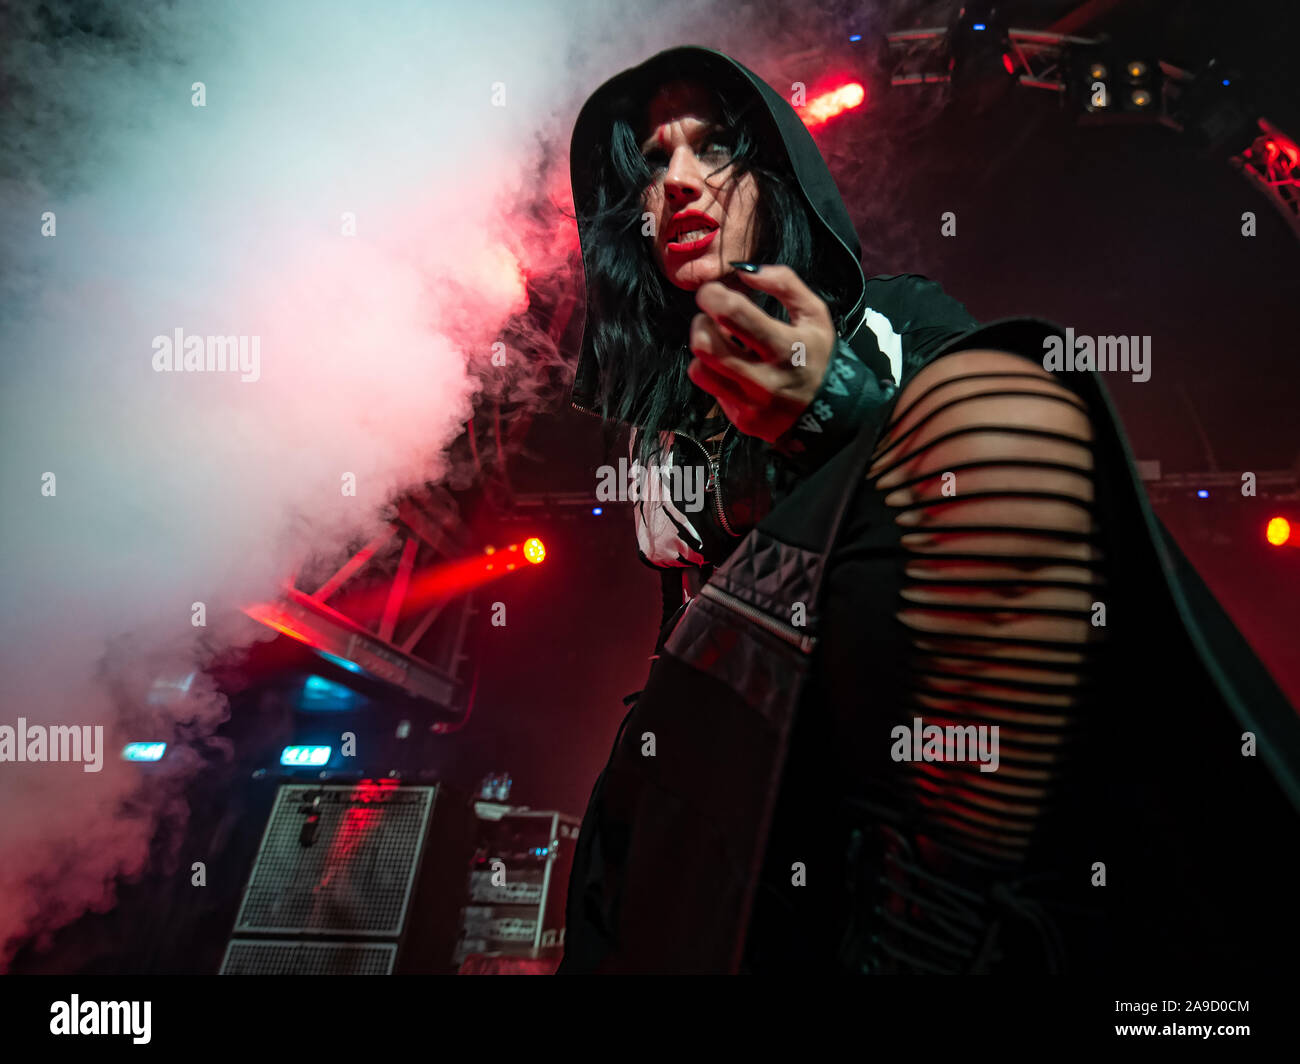 Glasgow, Scotland,UK 13th November 2019 - Italian EMO rockers Lacuna Coil  entertain a sold out crowd at The Garage. Copyright Stuart Westwood Stock  Photo - Alamy